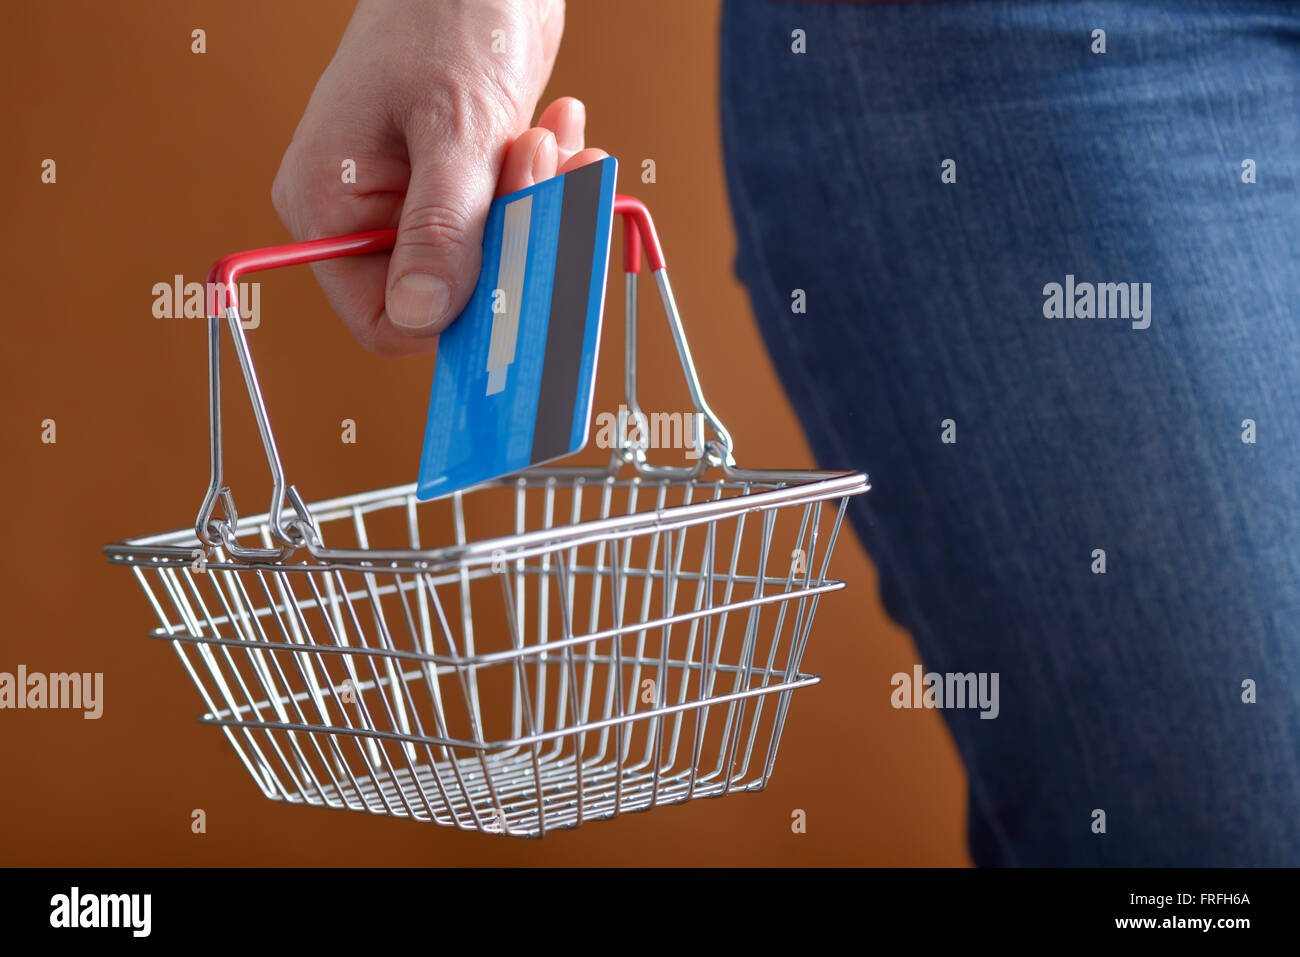 Online shopping with shopping basket and credit card Stock Photo